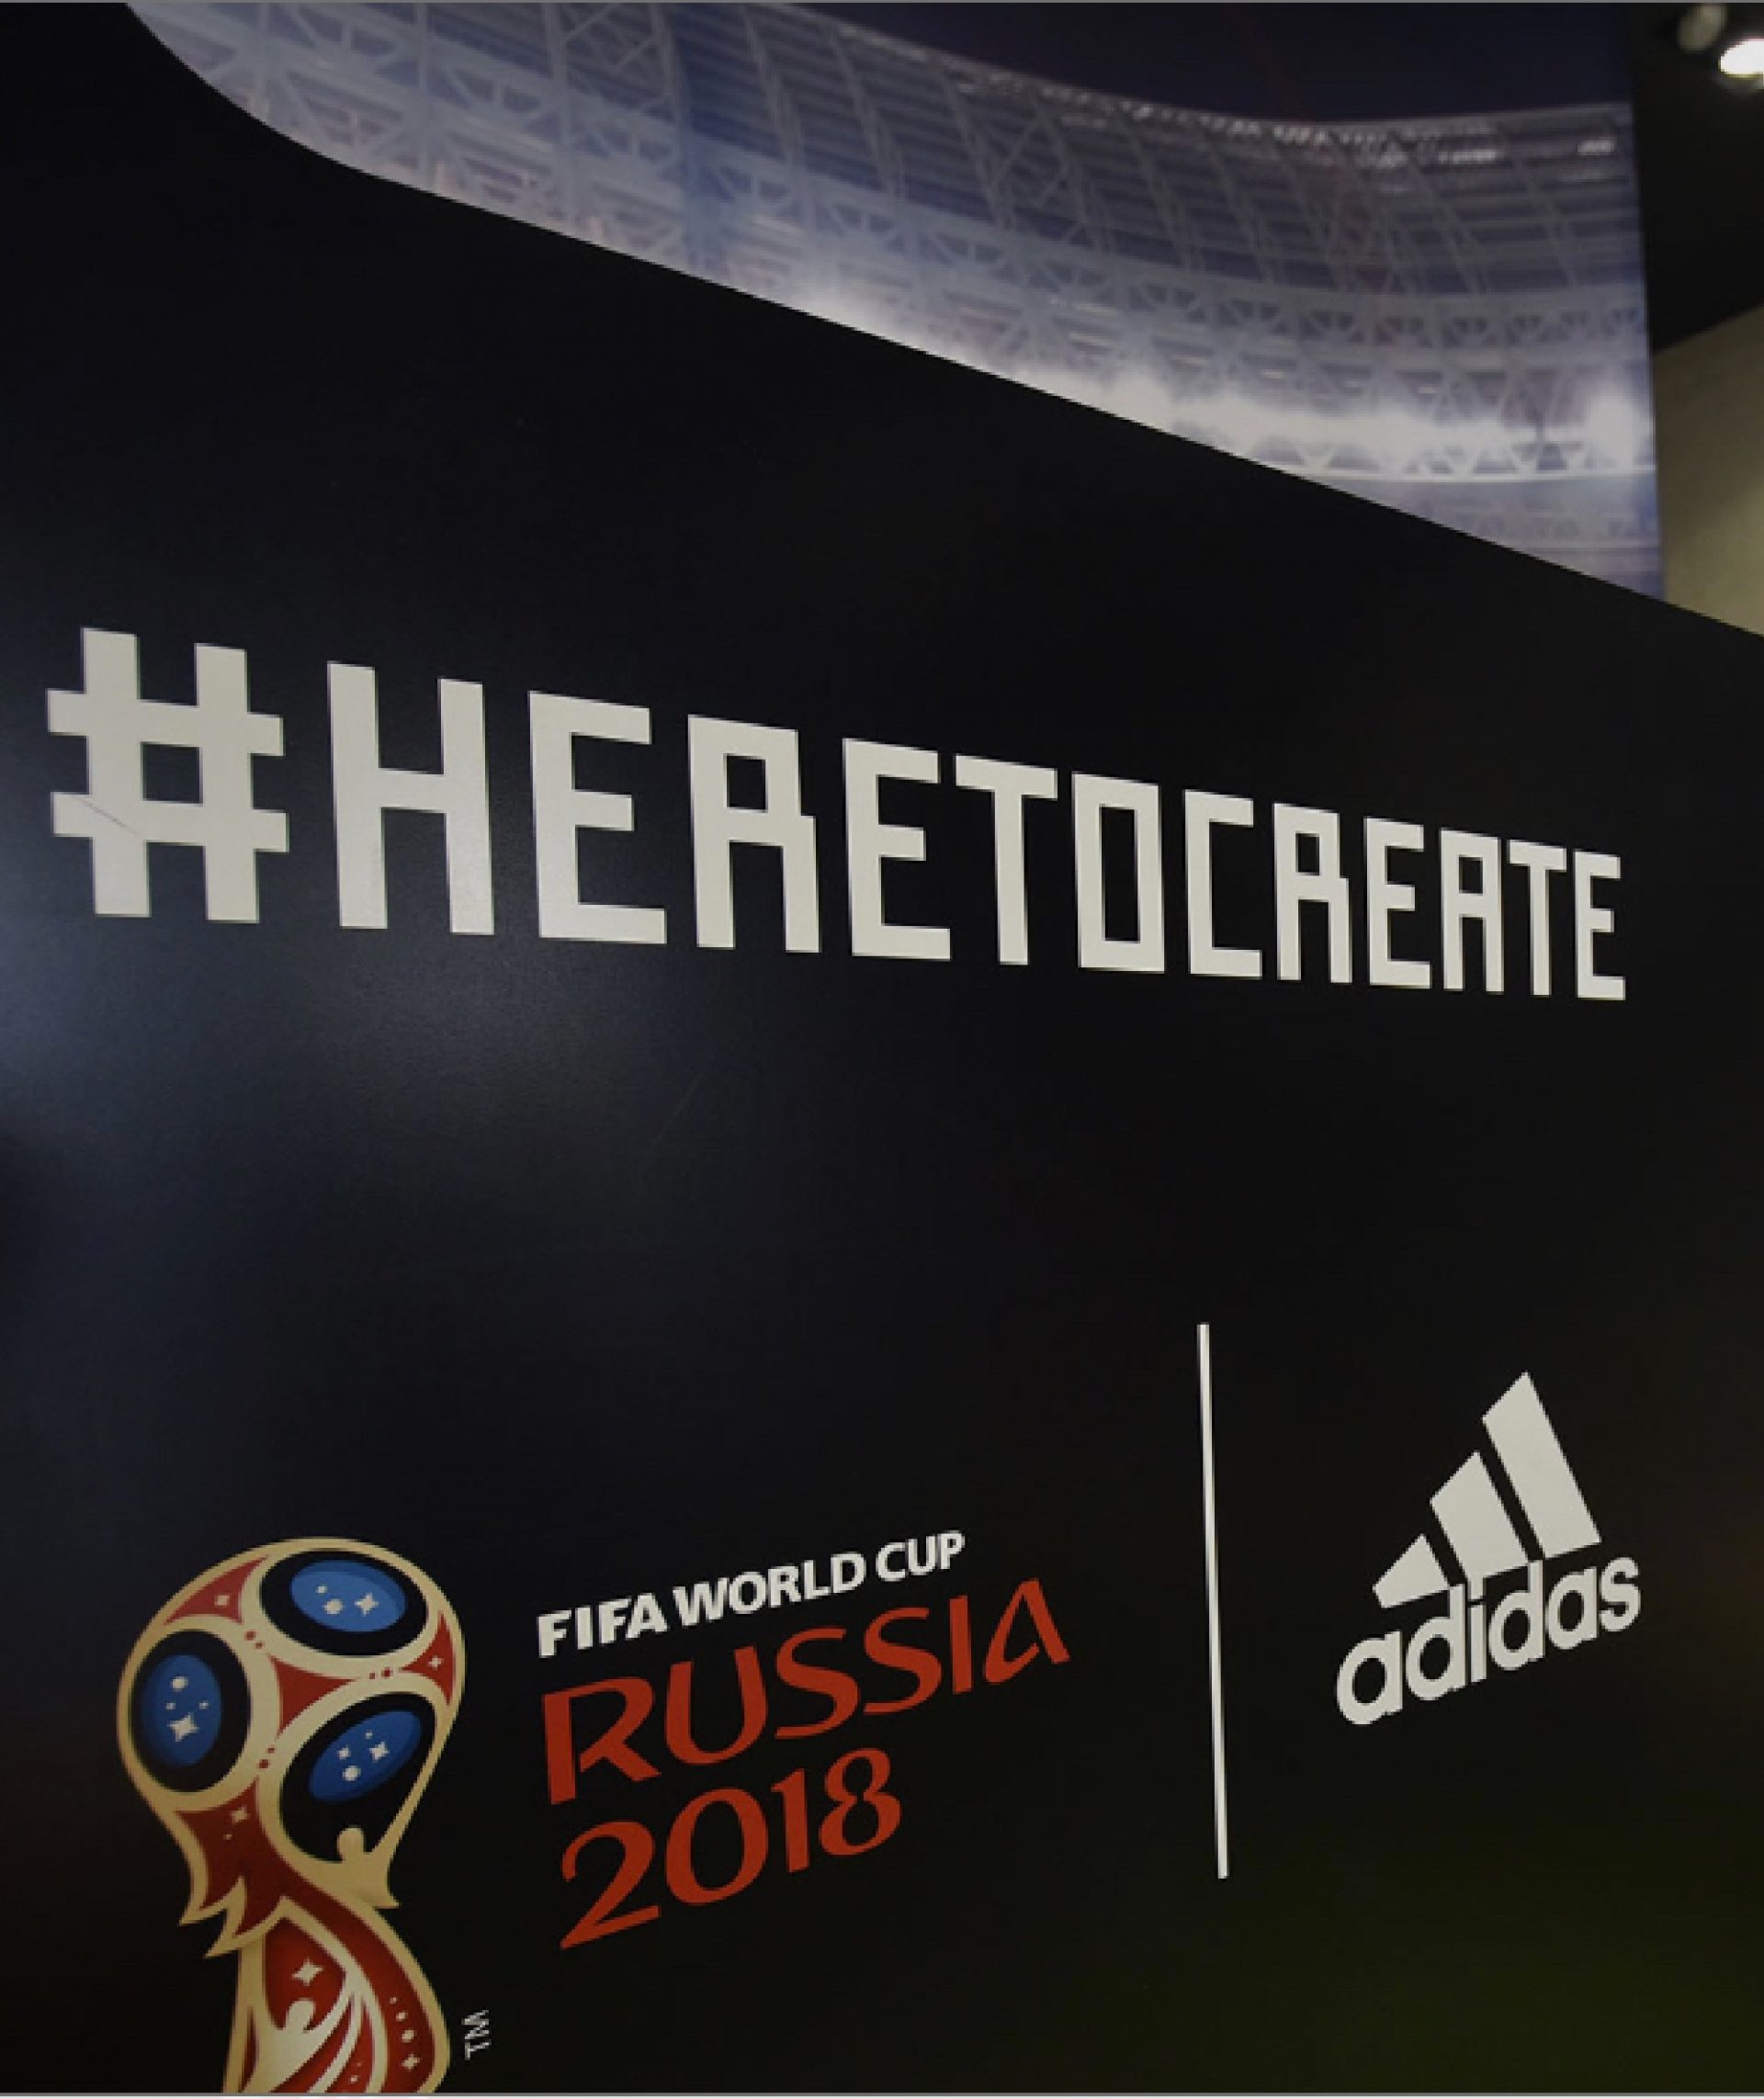 #HERETOCREATE World Cup Campaign Activation